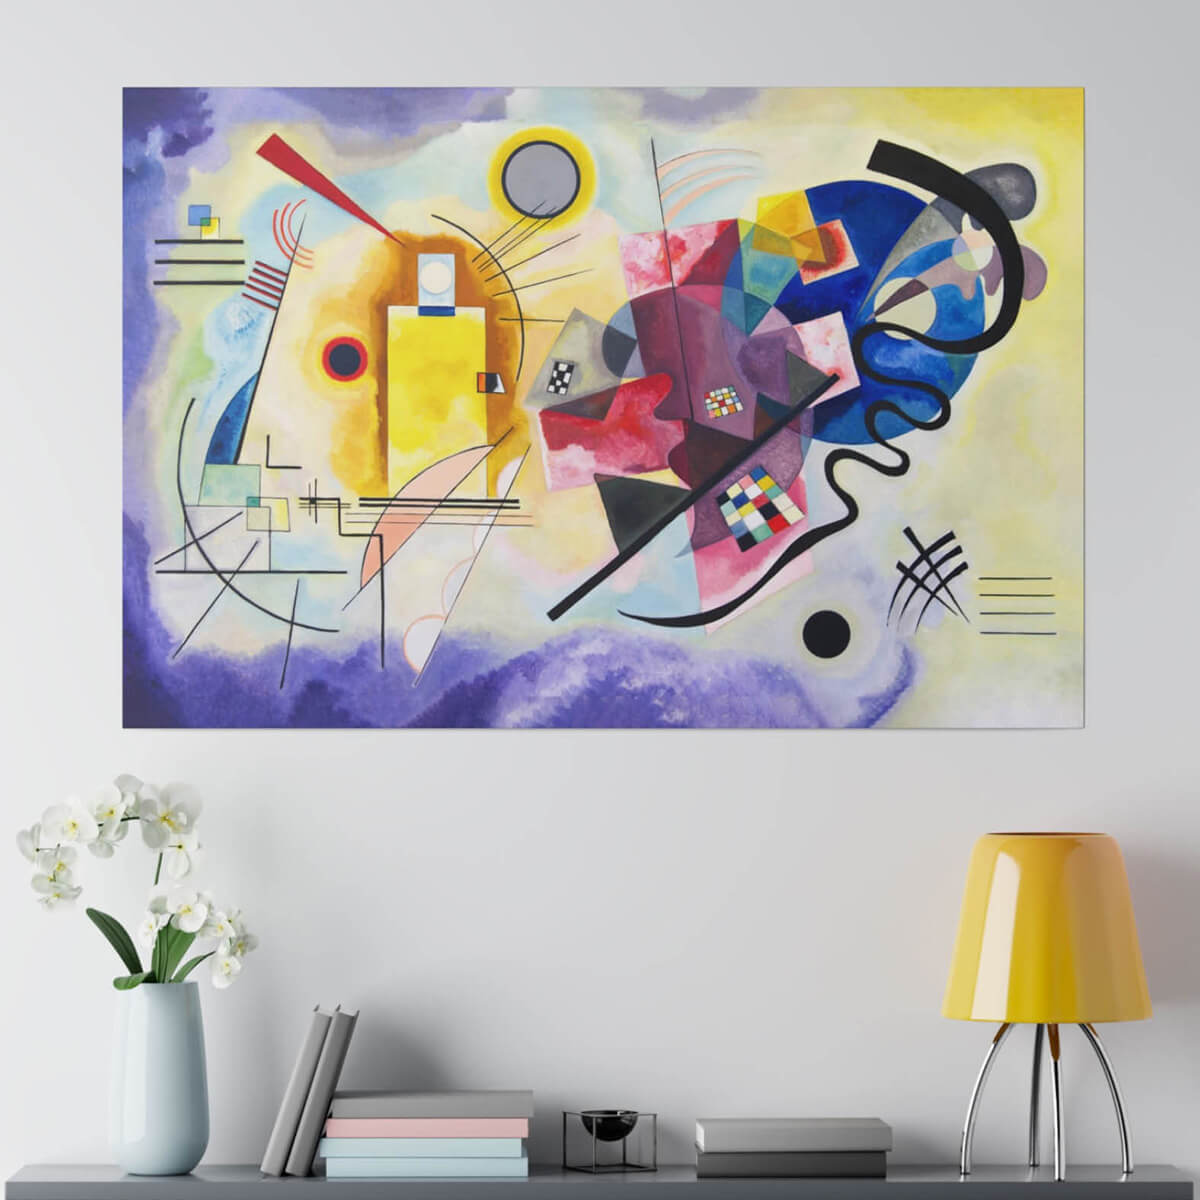 Contemporary Fine Art Print inspired by Wassily Kandinsky